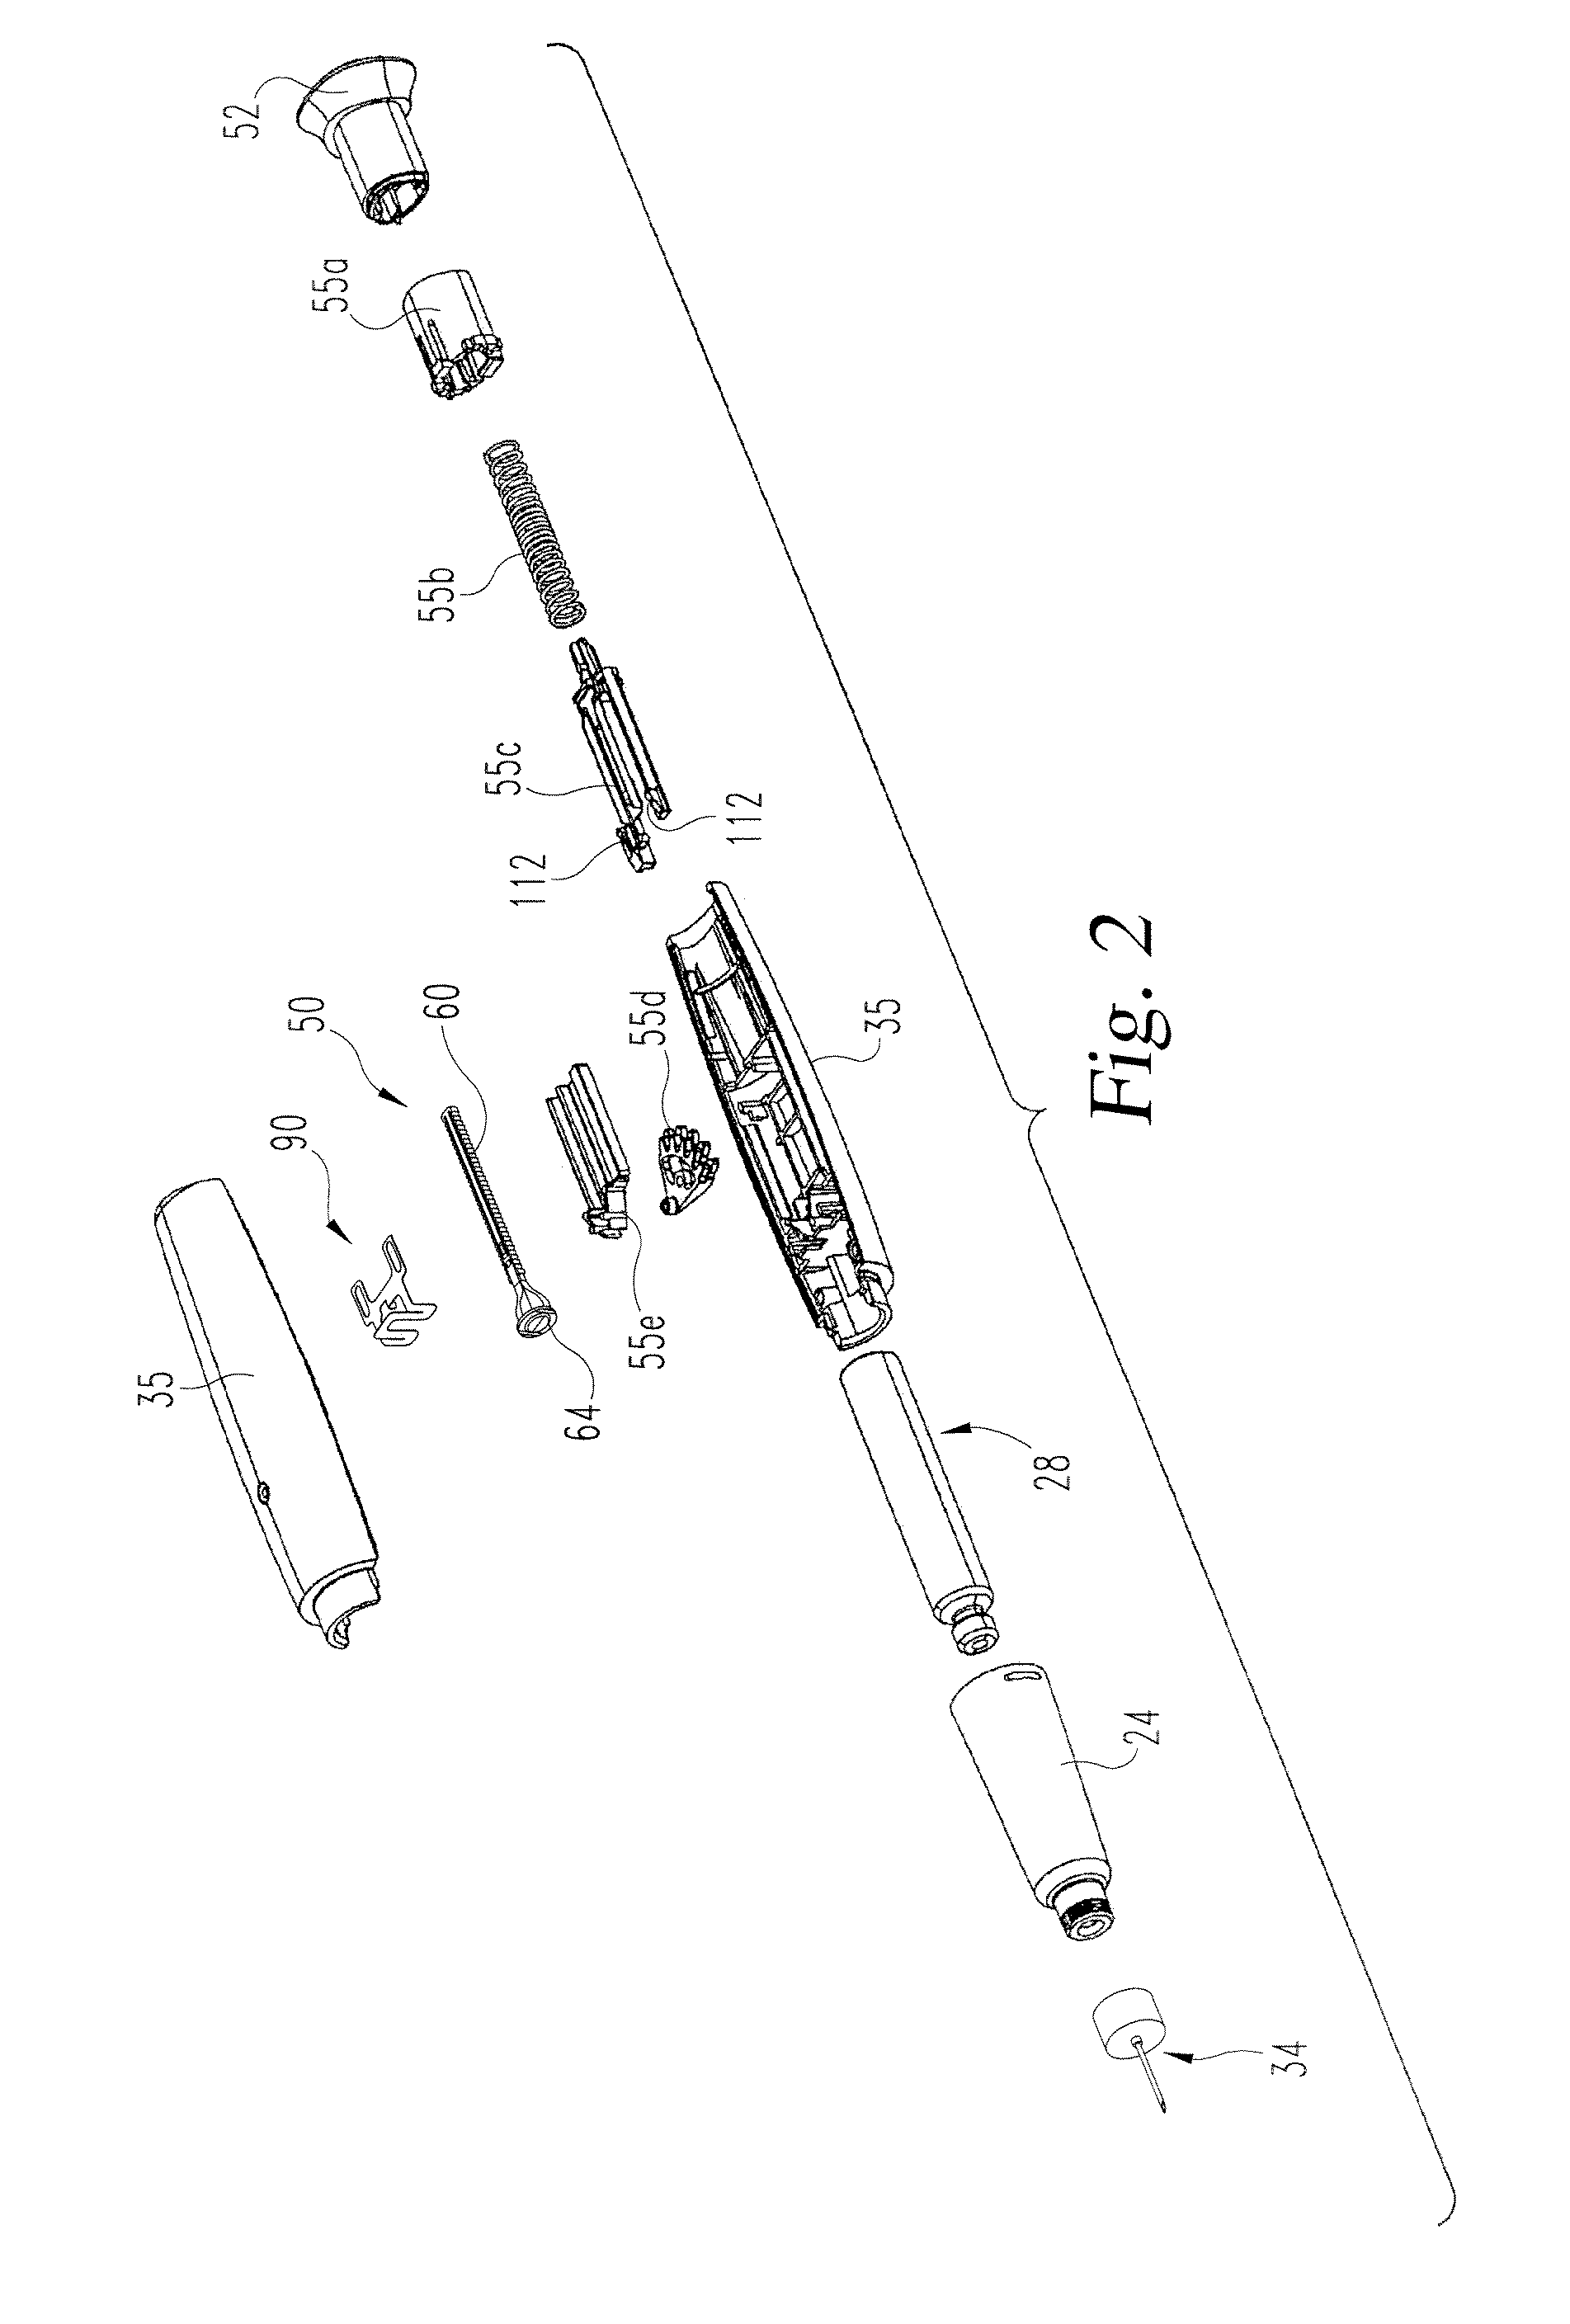 Locking assembly for preventing dispensing of dose from medication dispensing device